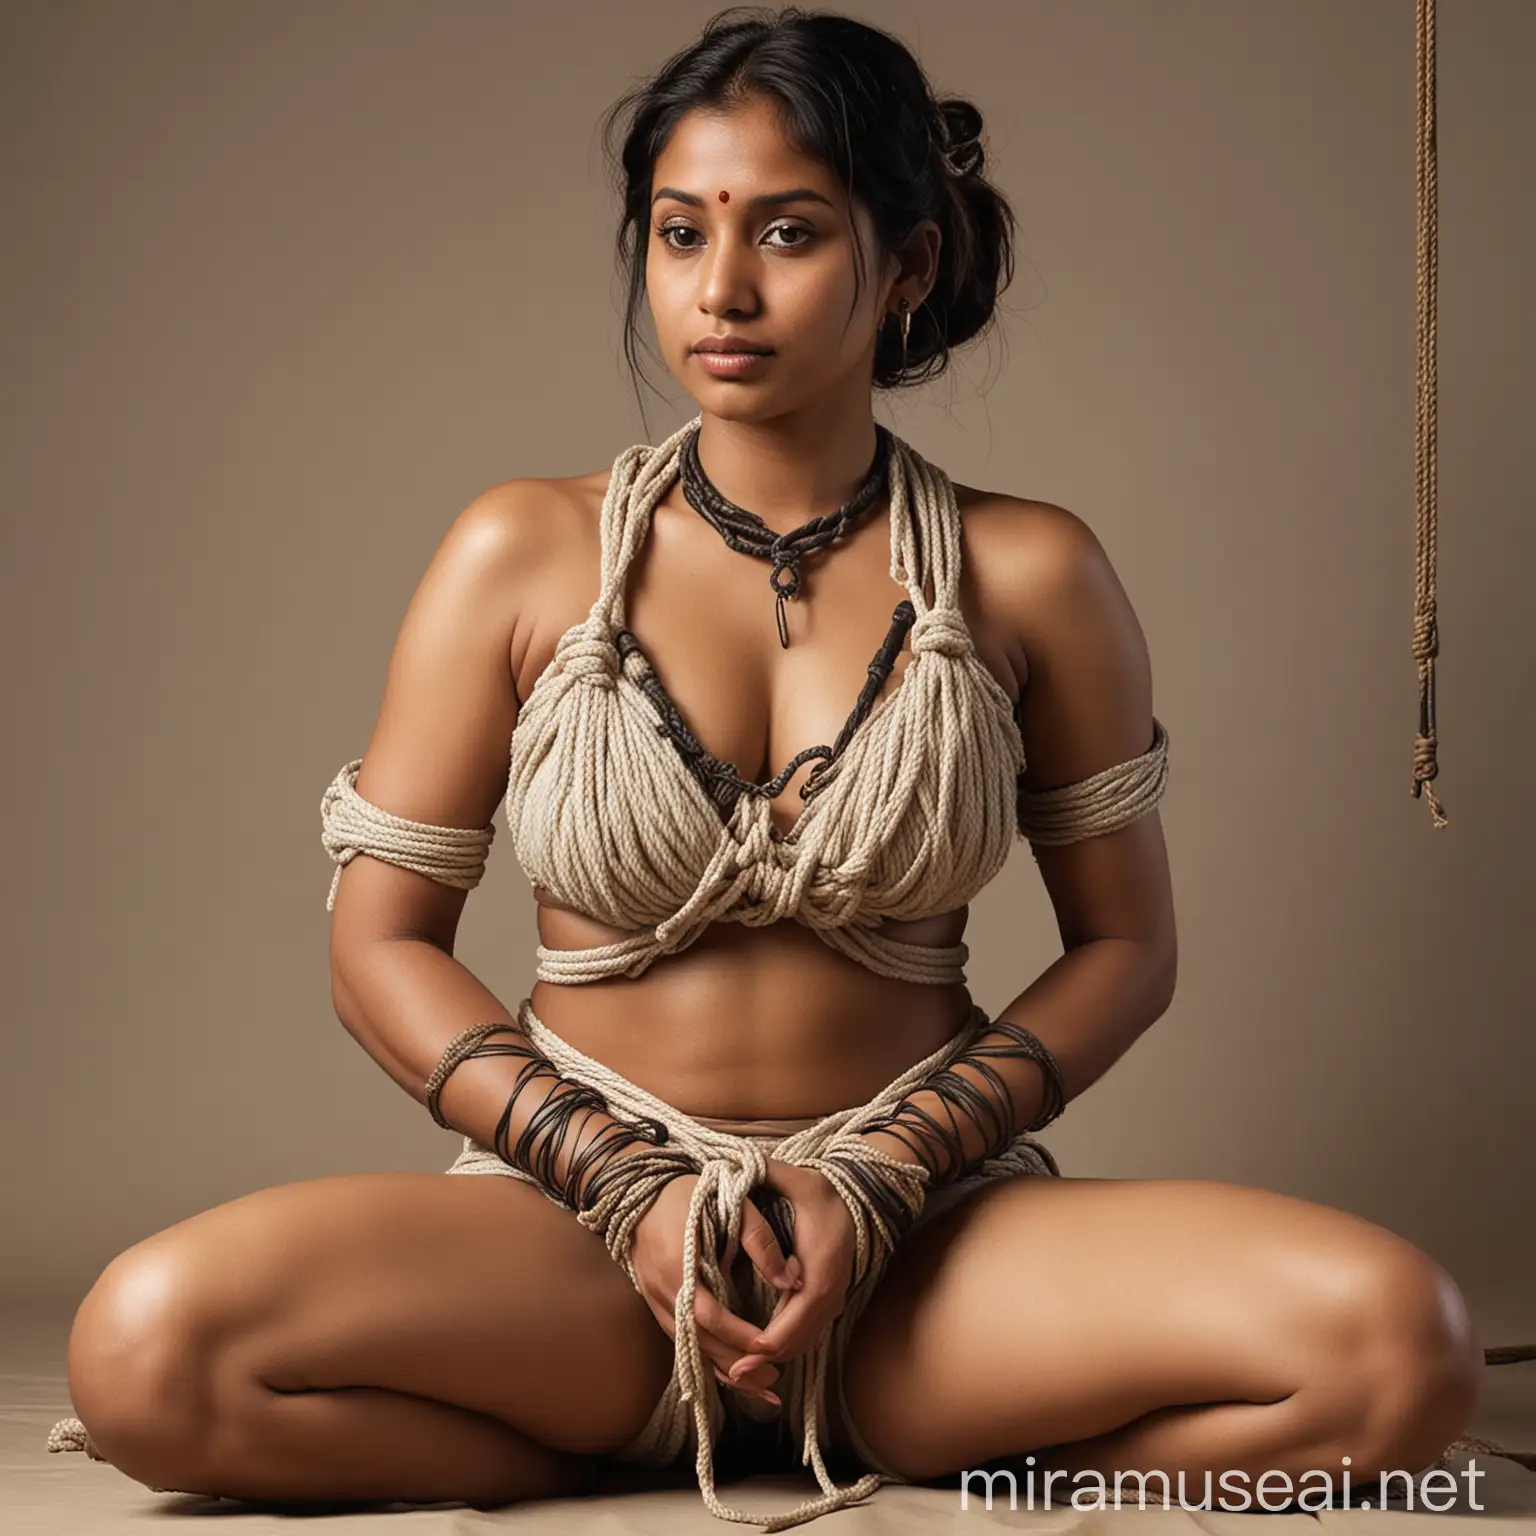 Indian Woman in Extreme Shibari with Hands Bound Behind Her Back